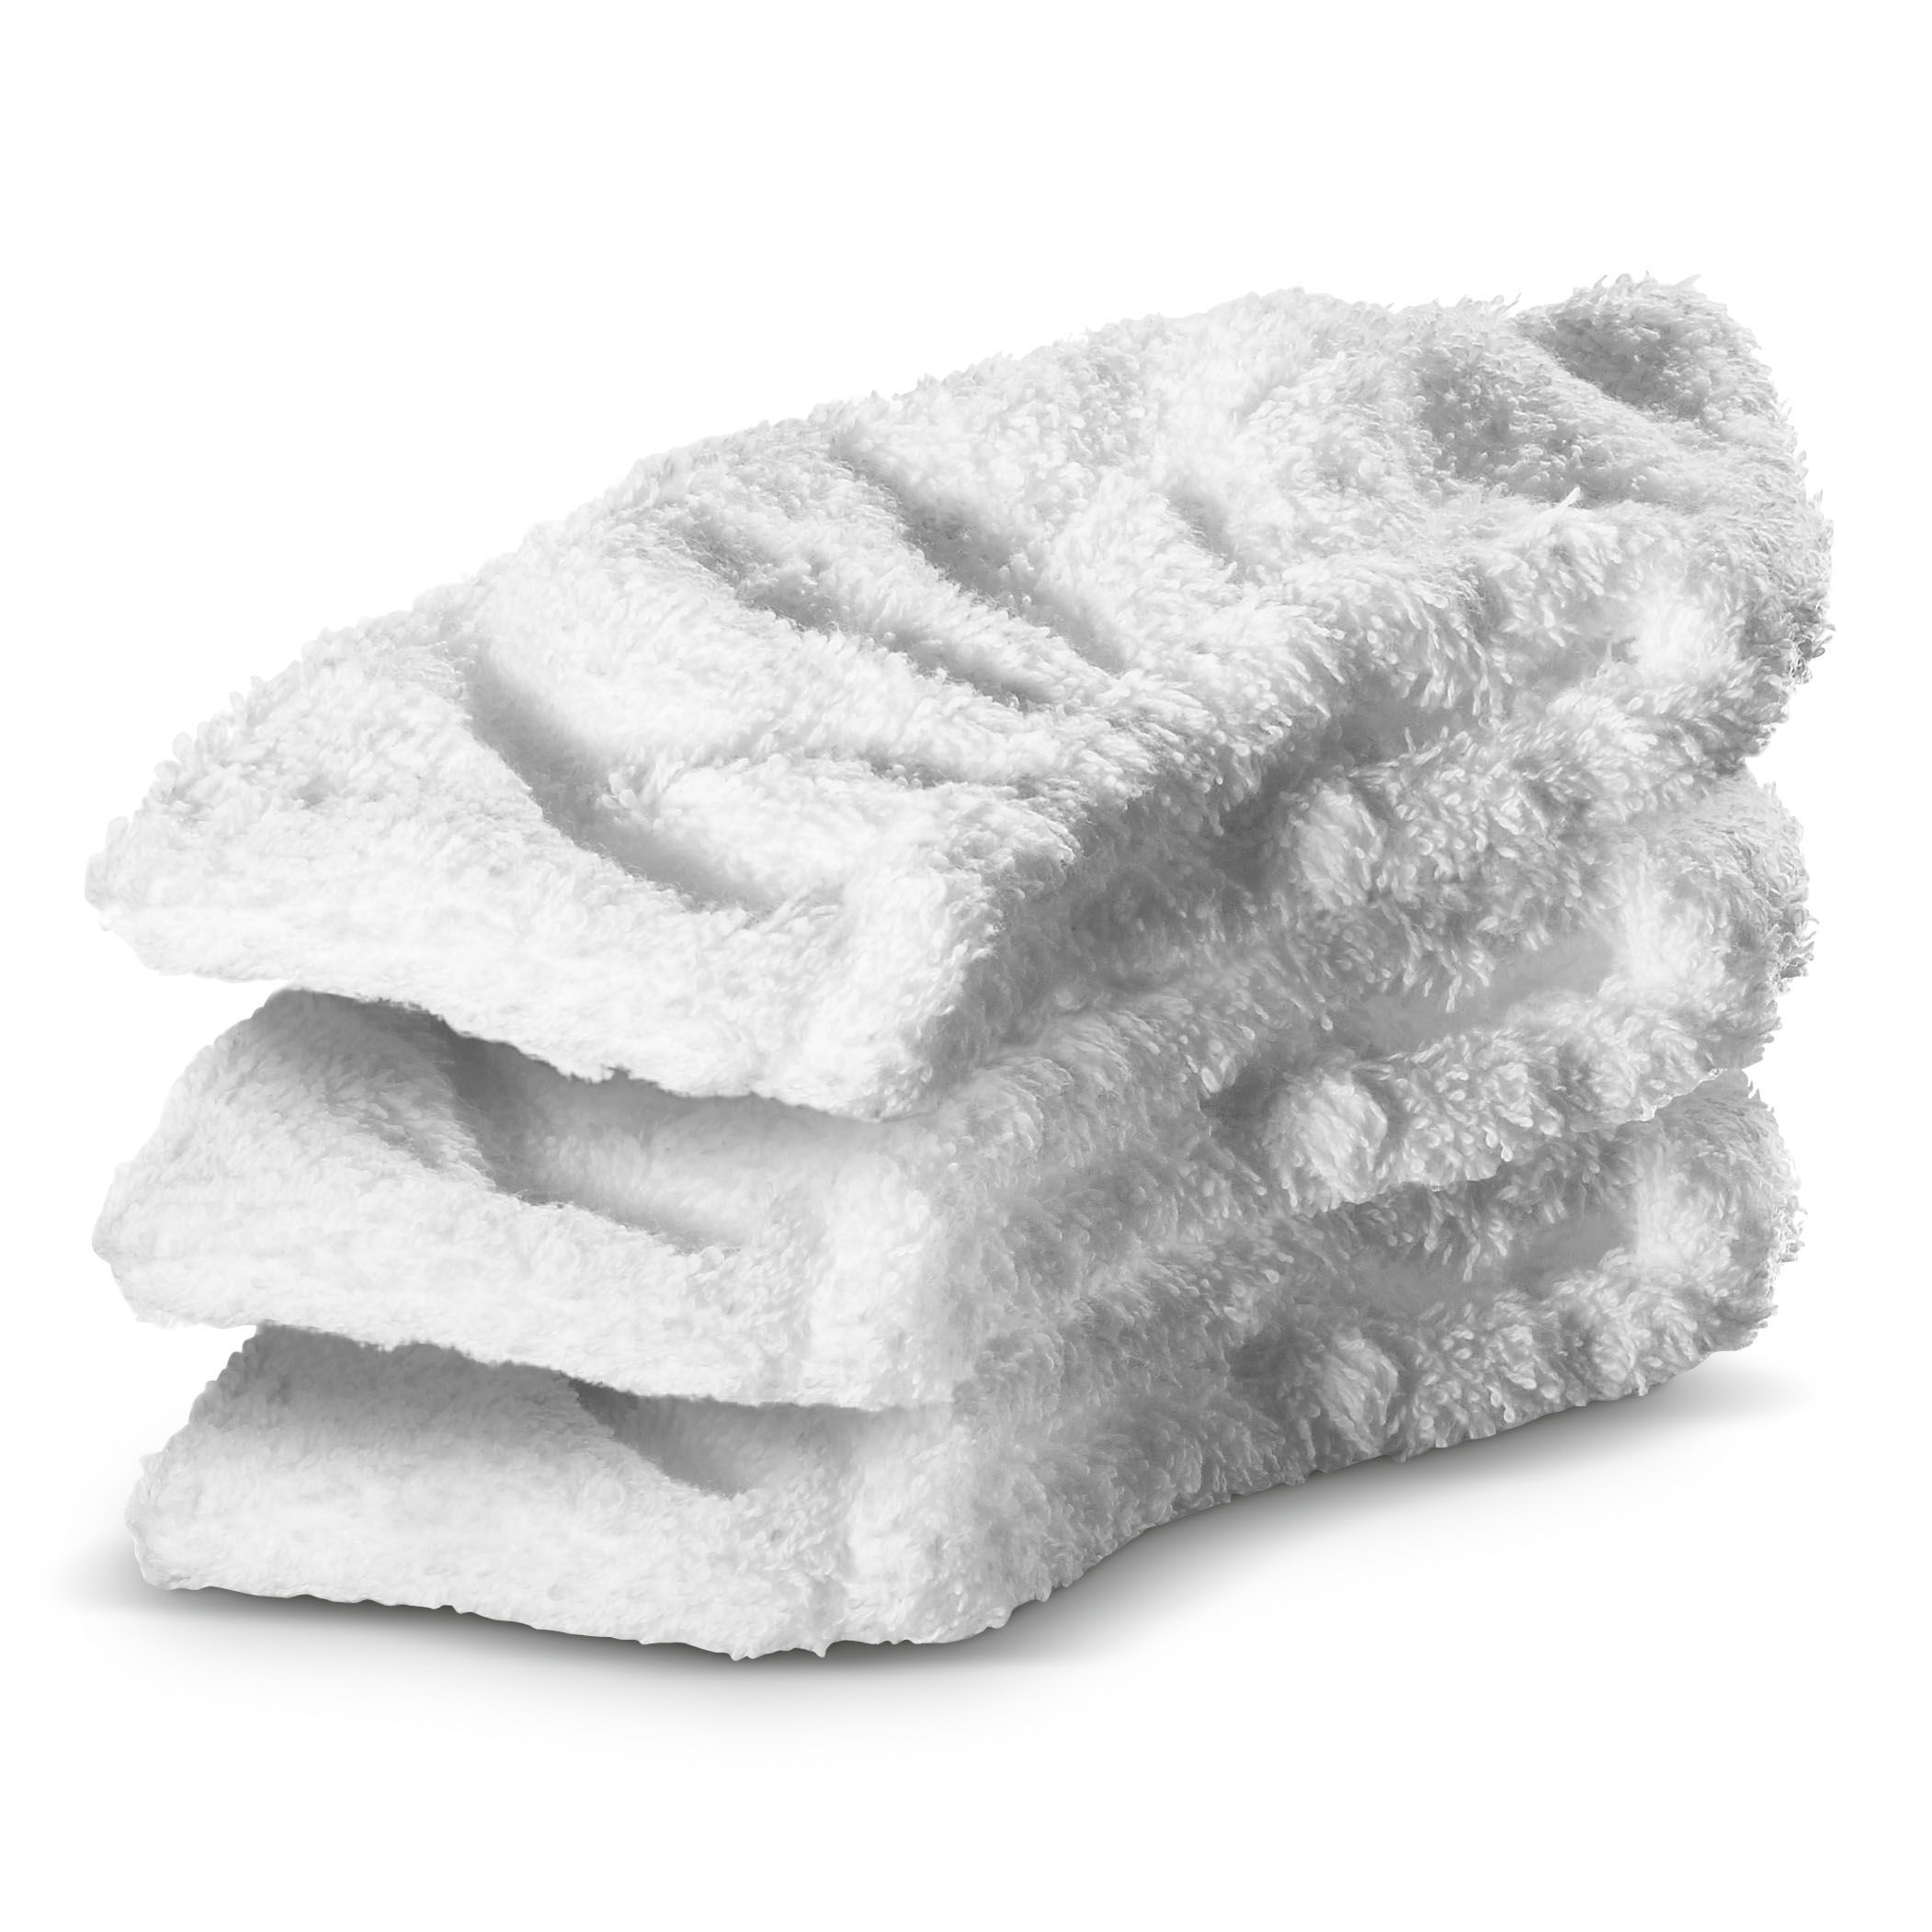 Kärcher Cotton Steam cleaner Fitted cleaning cloth, Set of 5